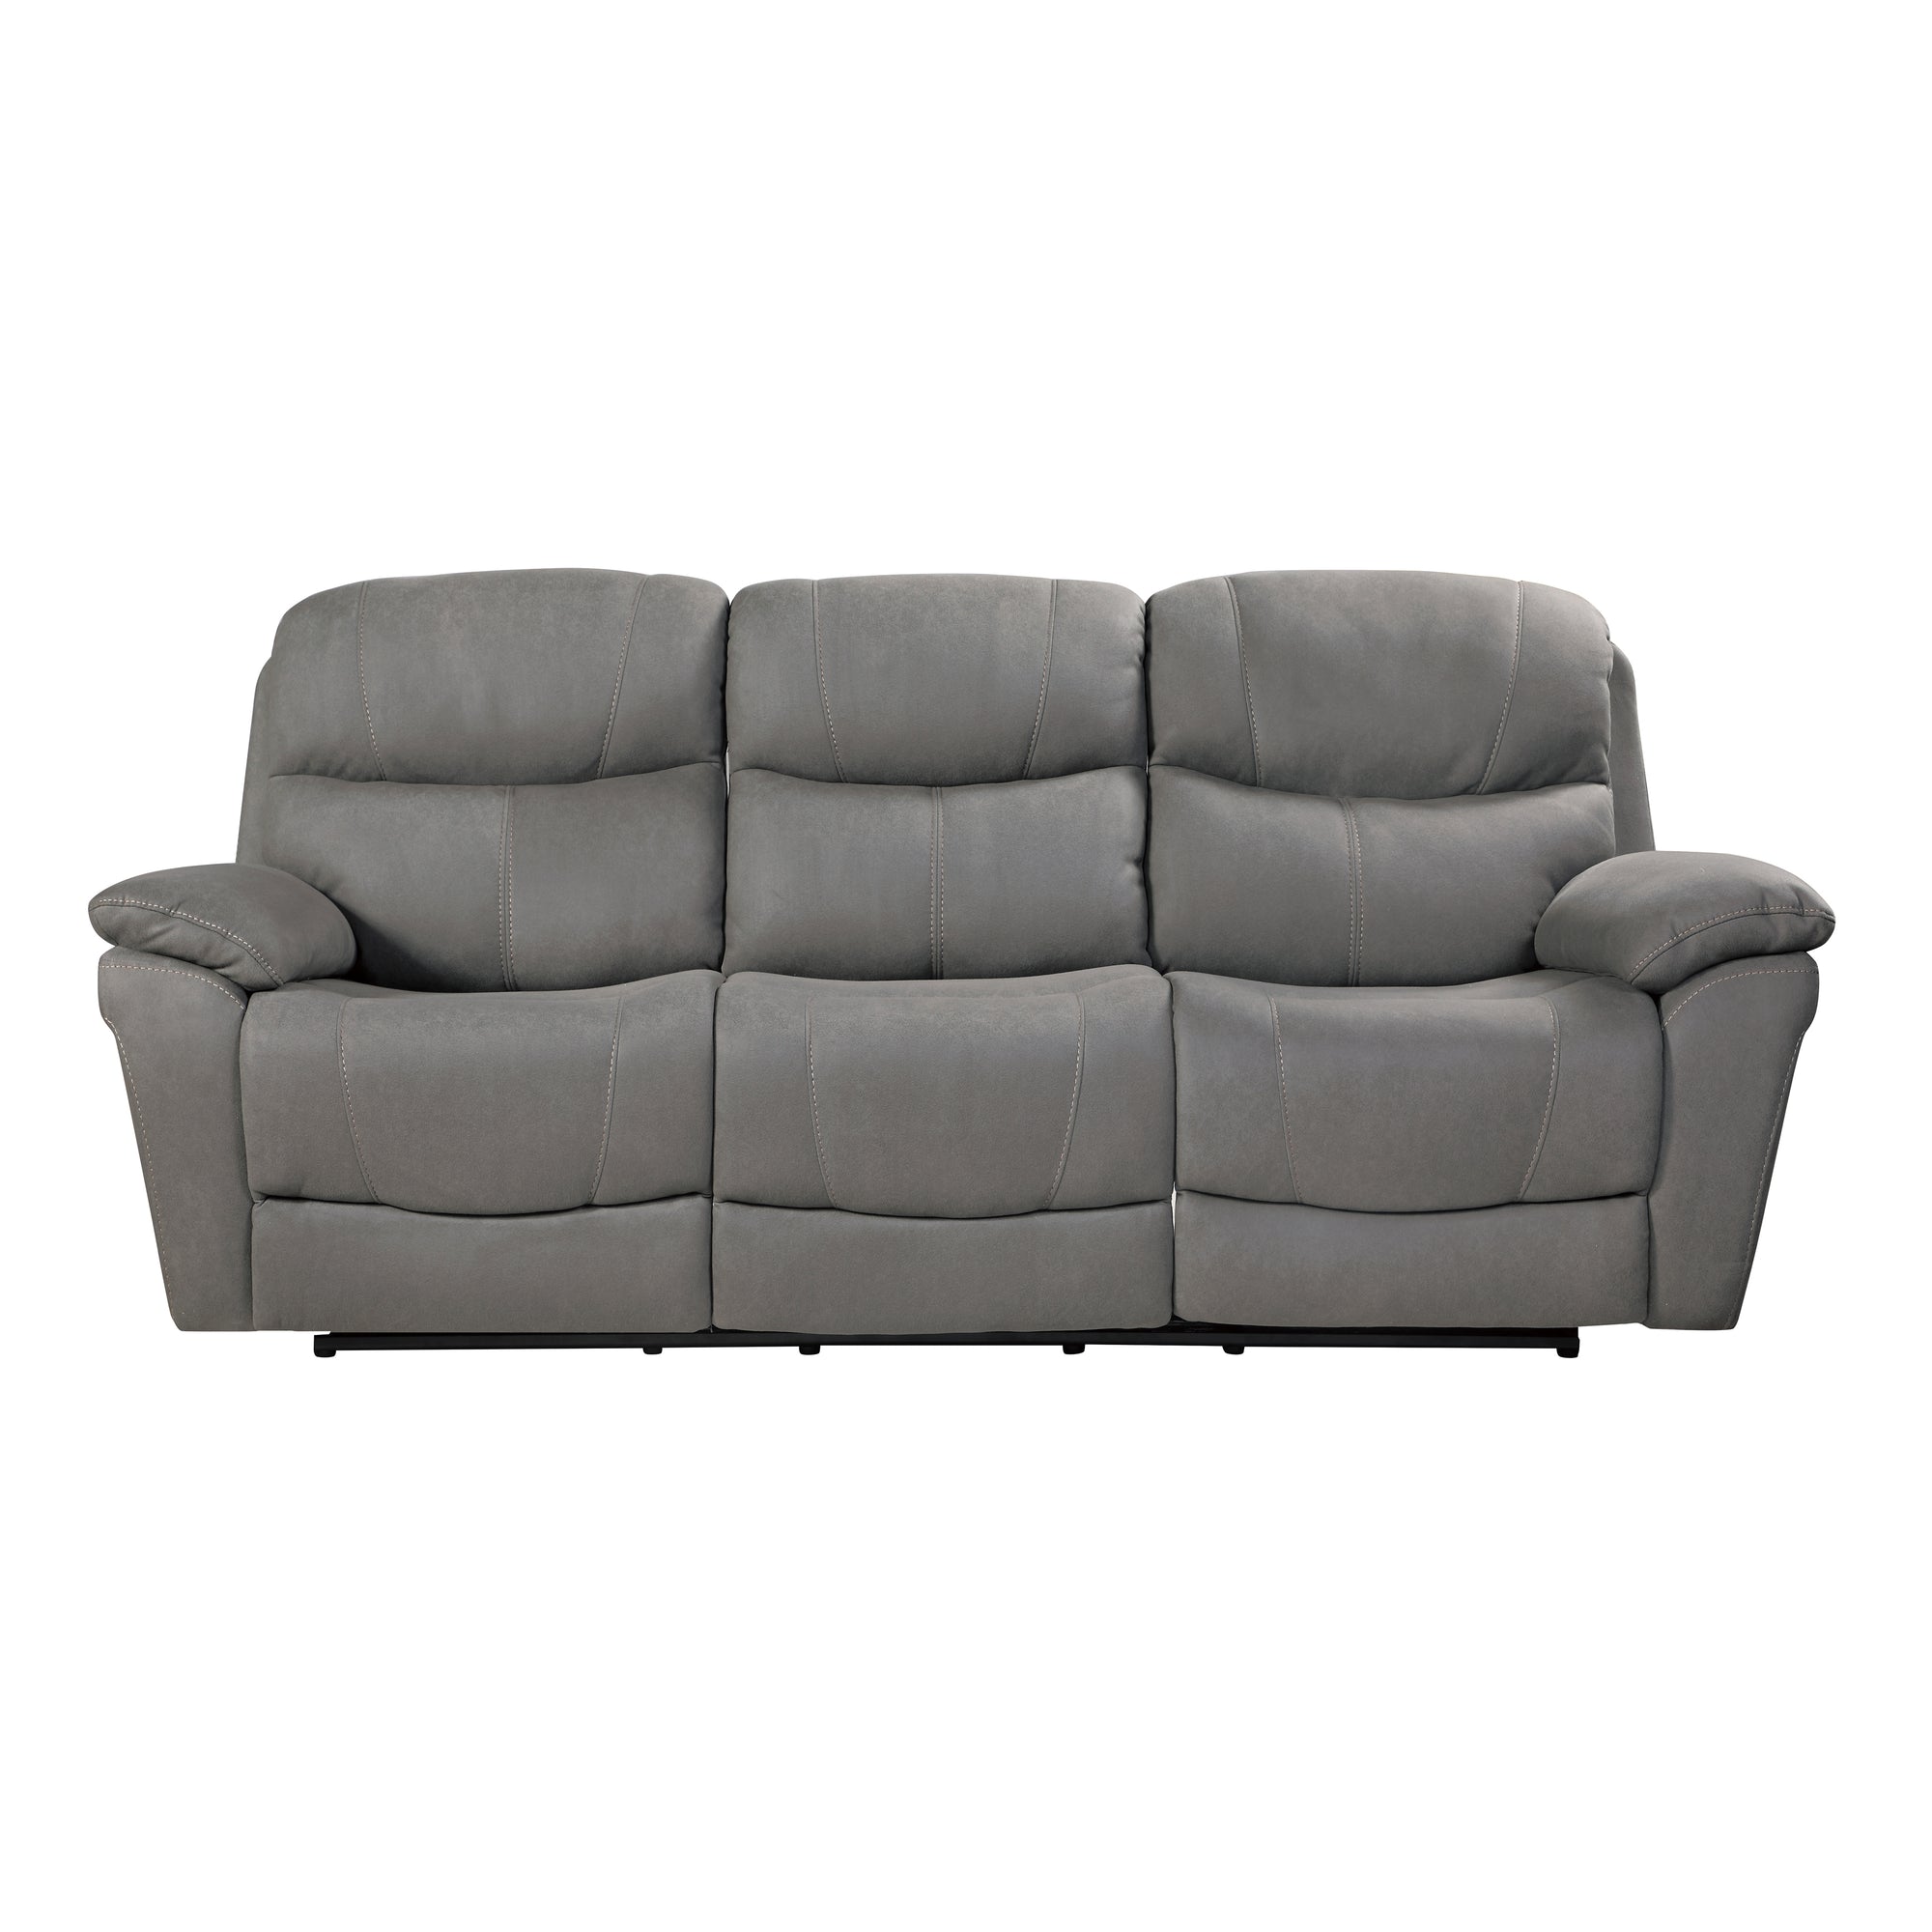 Mono Power Double Reclining Sofa with Power Headrests